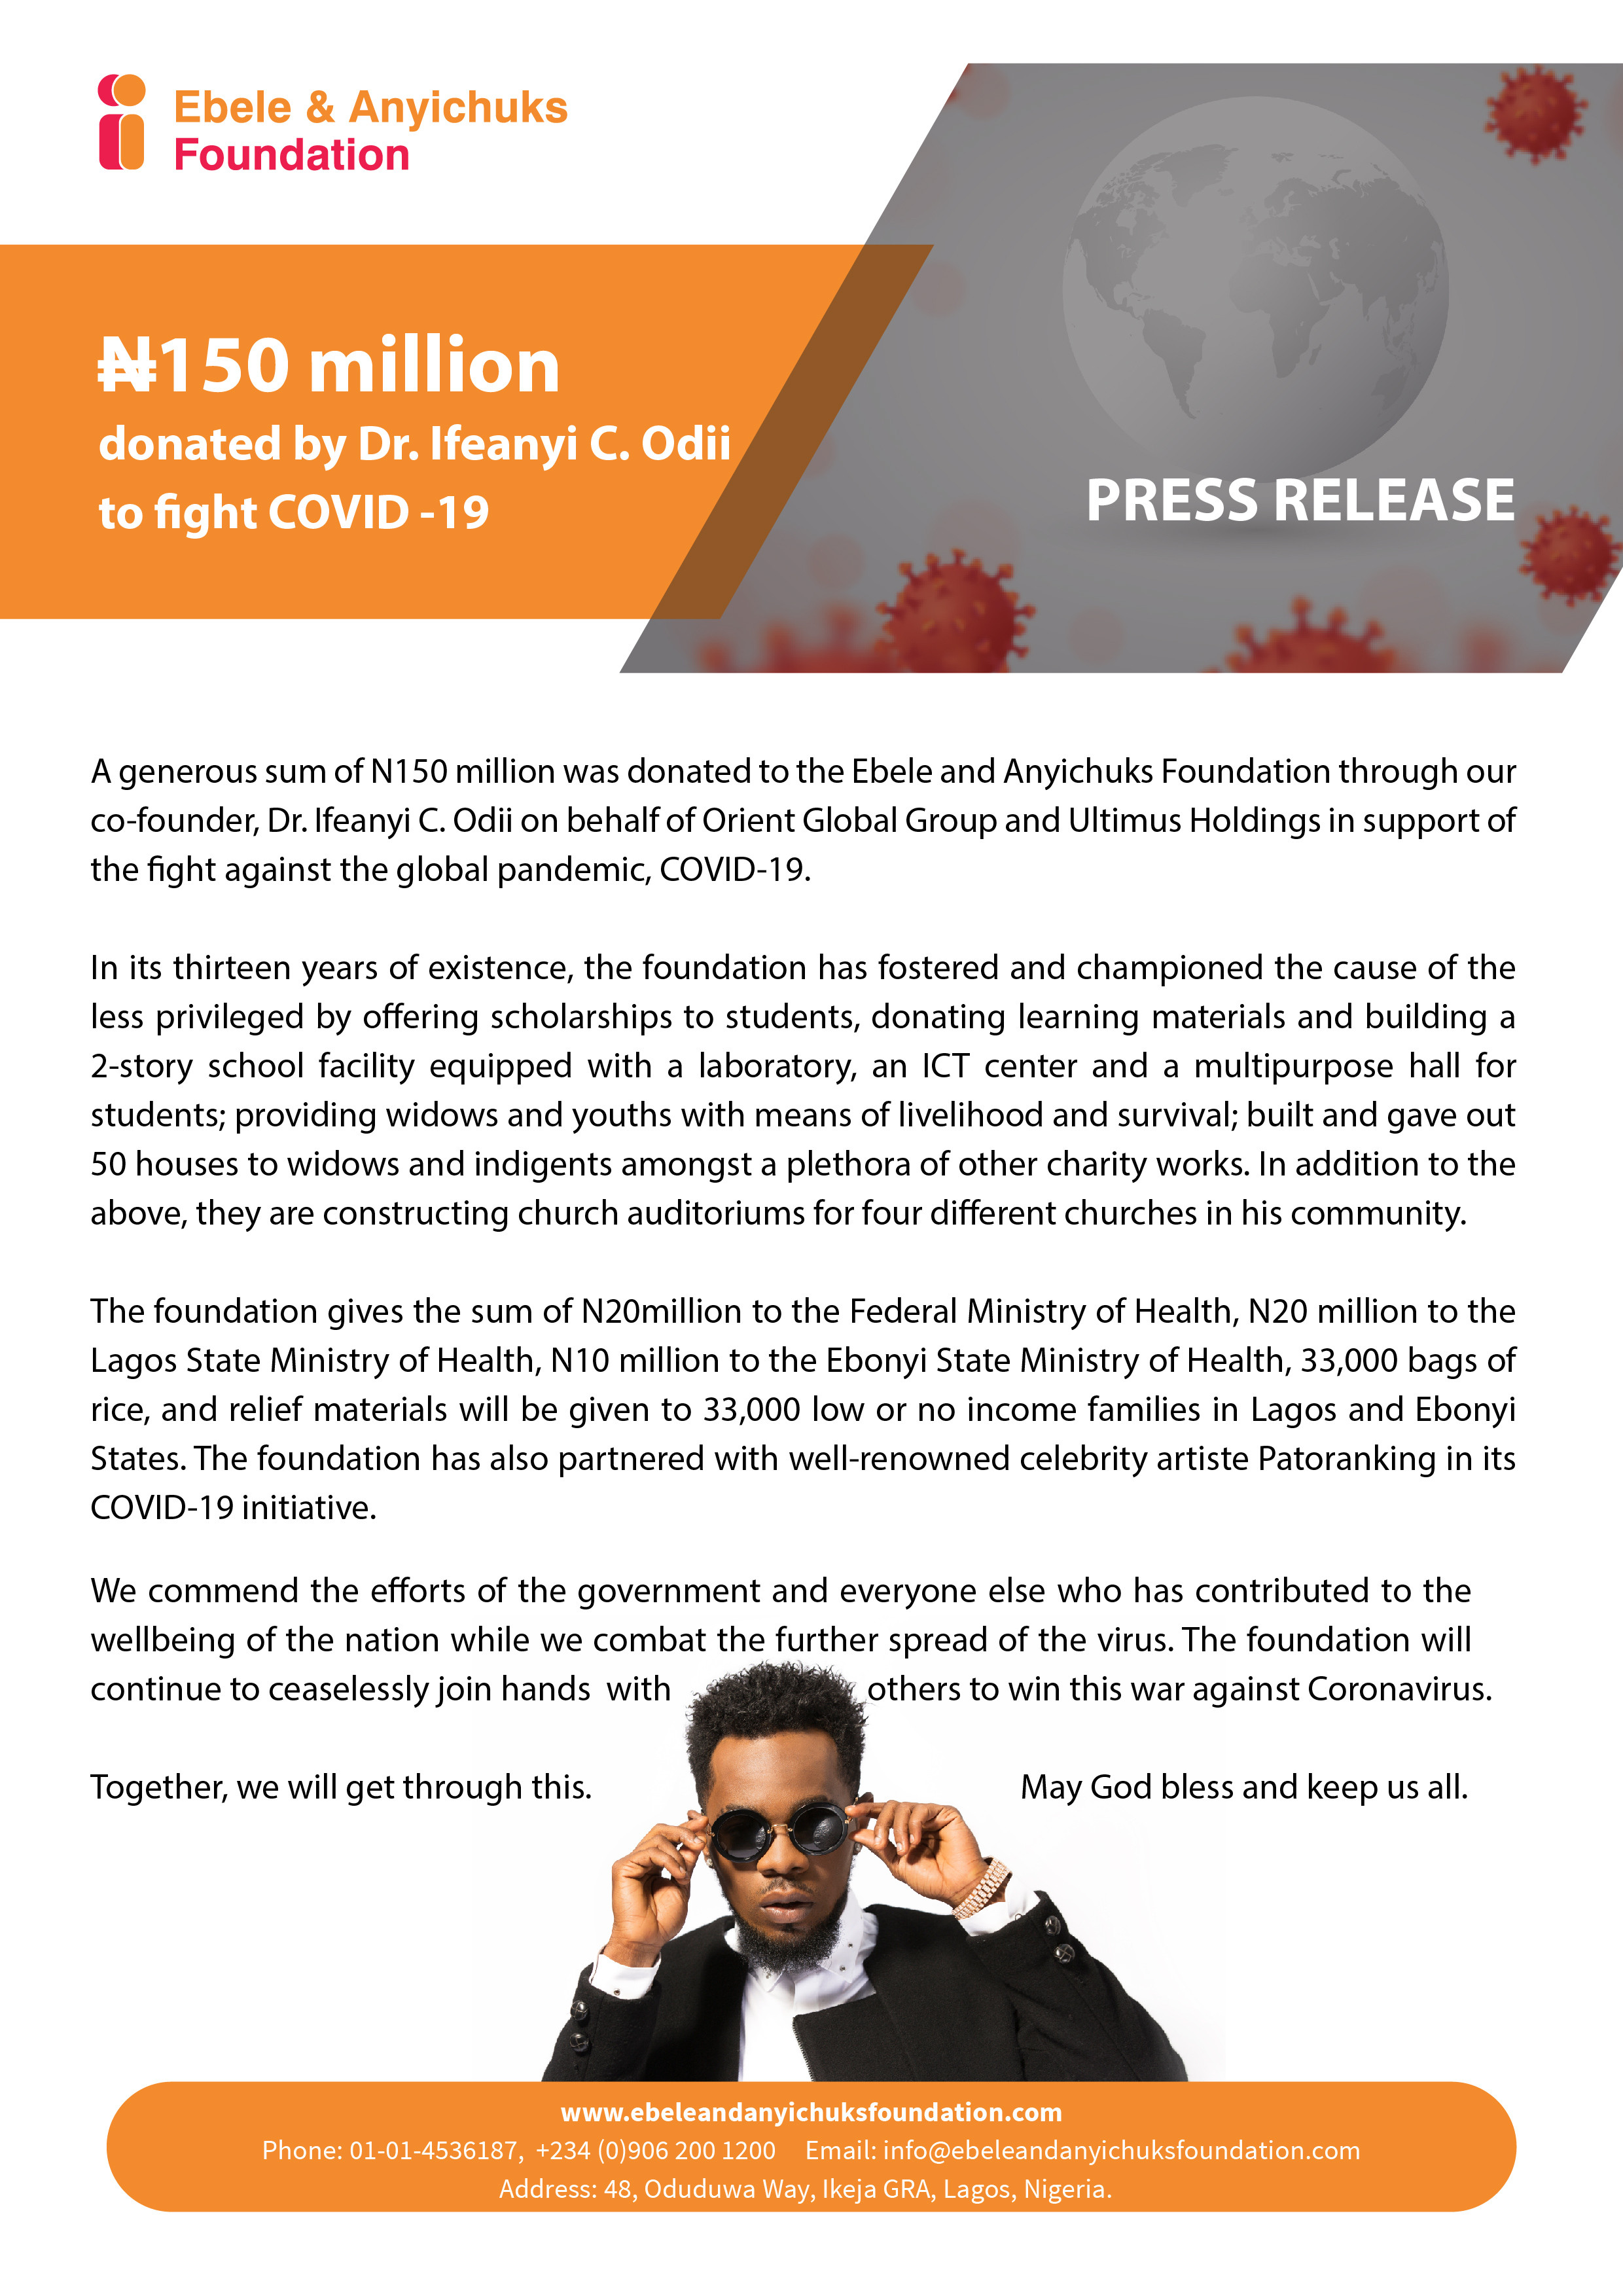 Ebele And Anyichuks Foundation Partners with Patoranking in its COVID-19 initiative